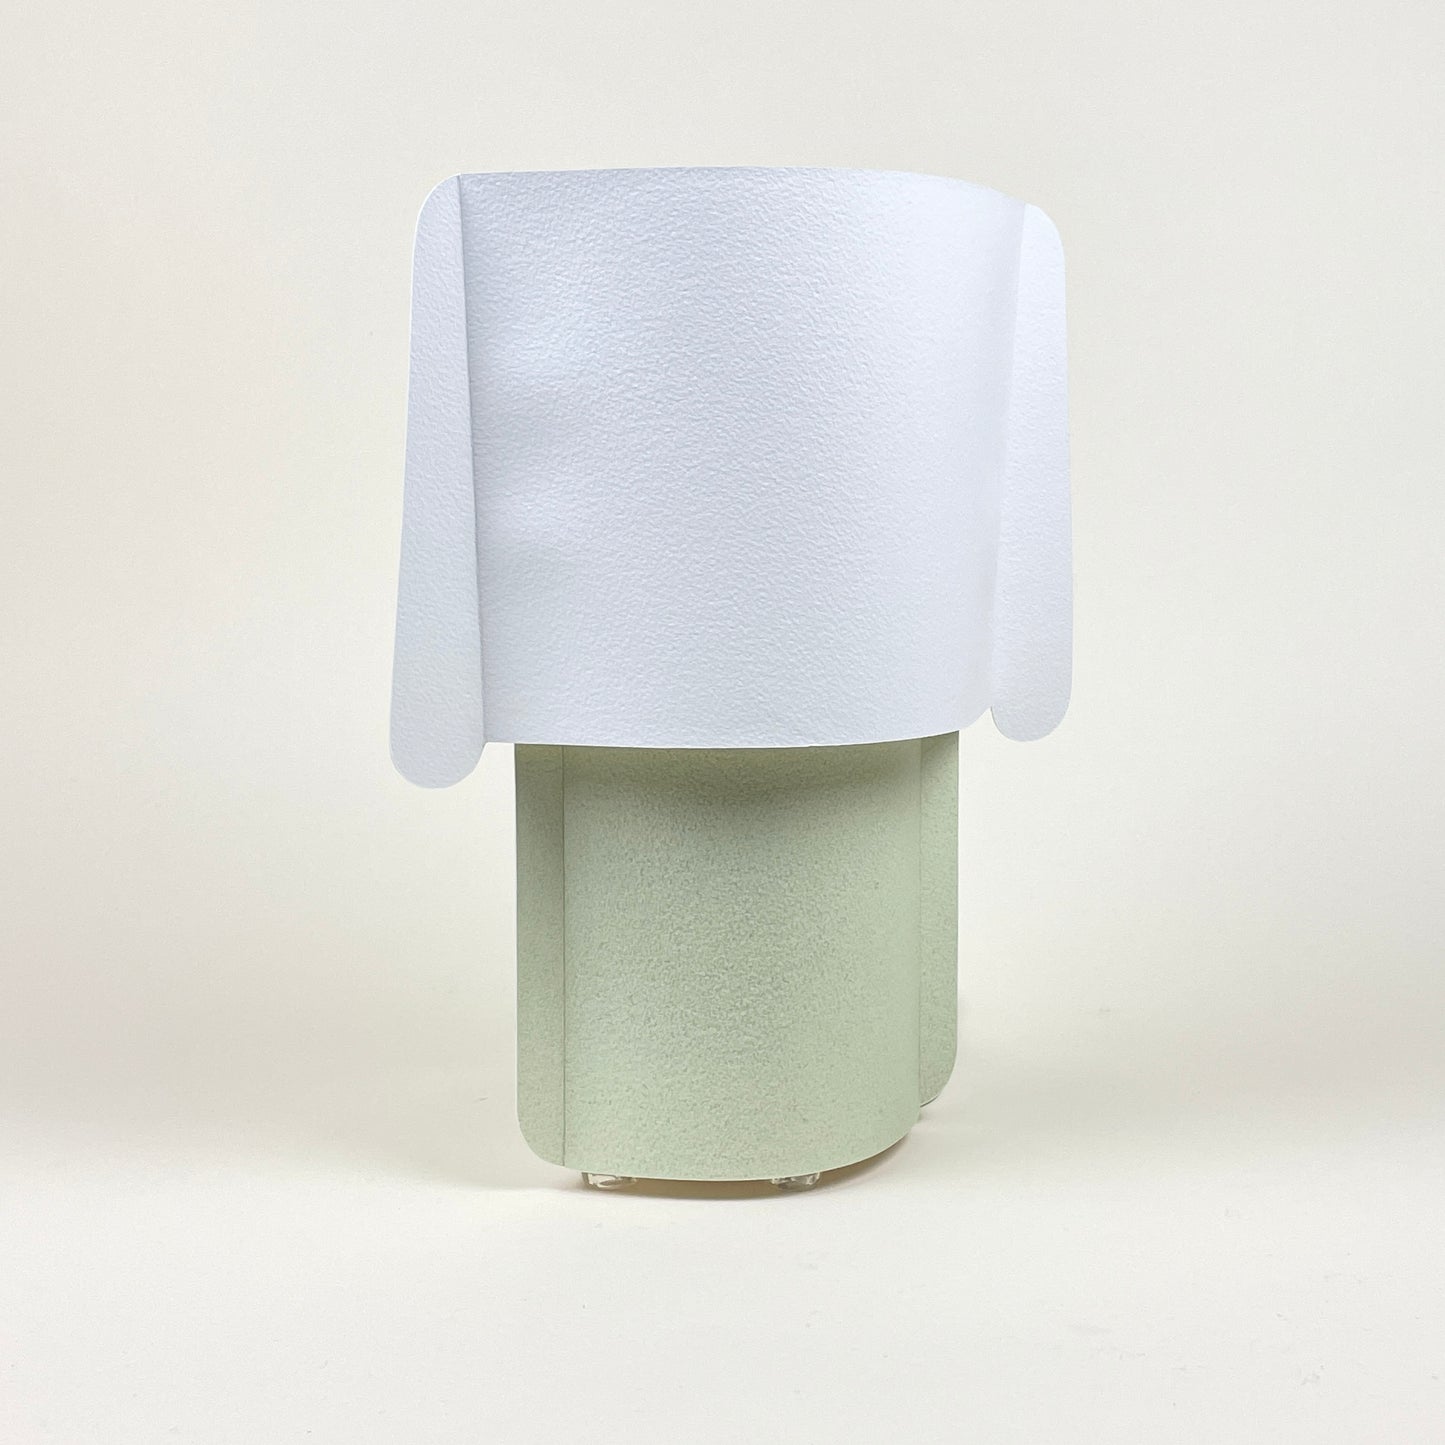 Sage and white Aquarelle Lamp by Adrian Bursell